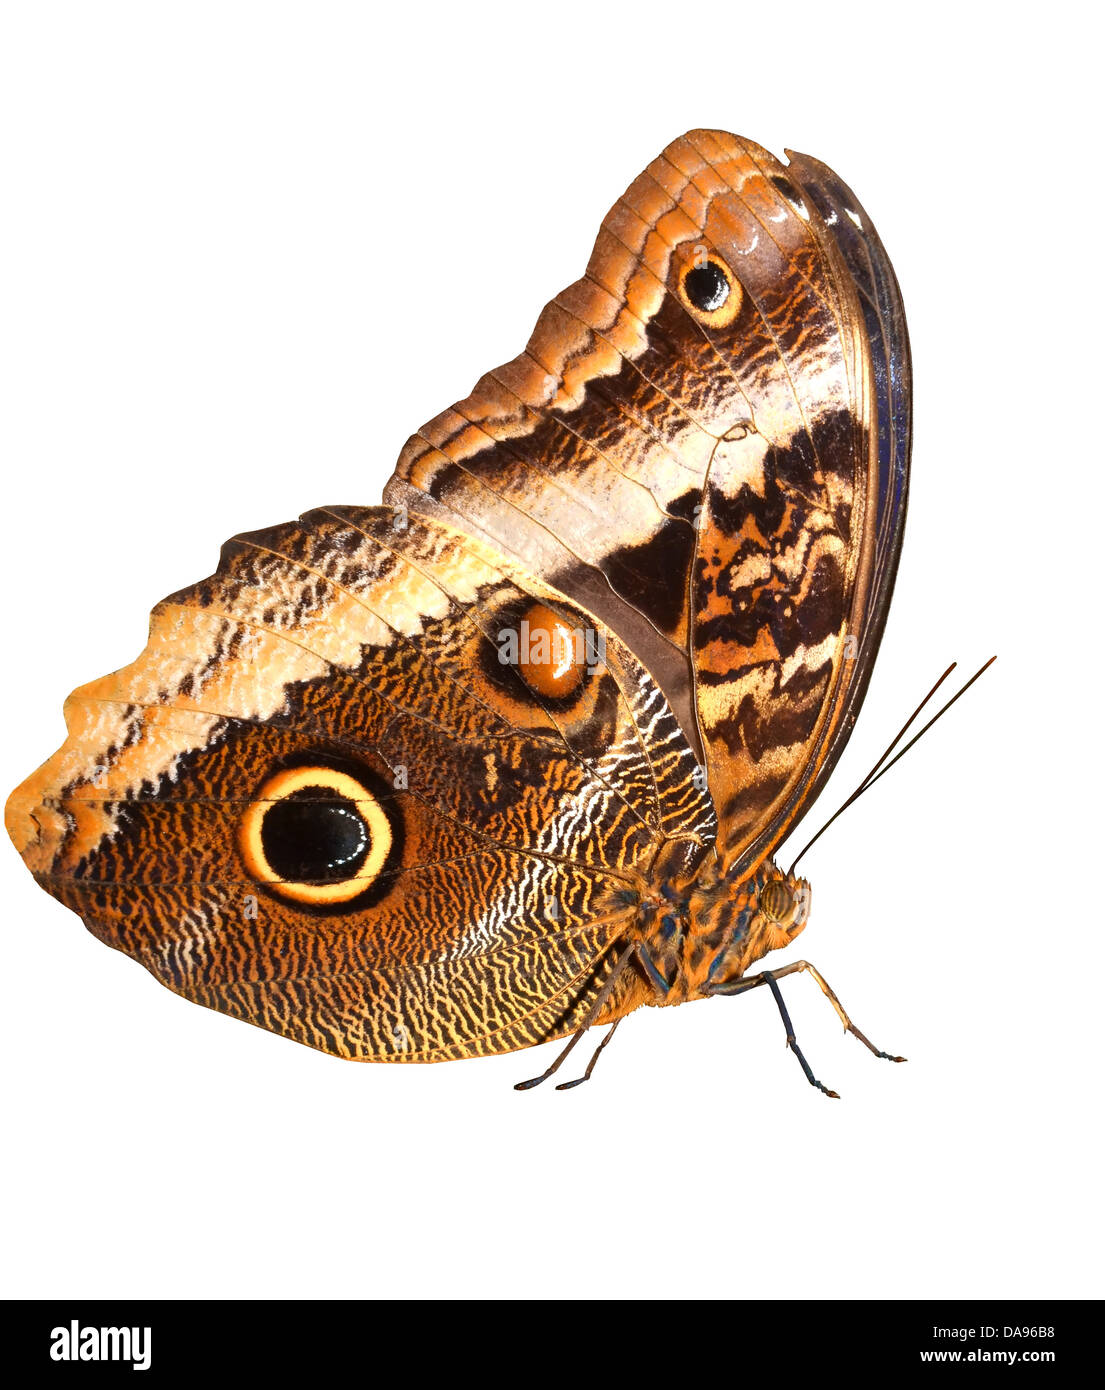 The lare and magnificent owl butterfly, with large eye markings isolated against a white background. Standing, and right side vi Stock Photo